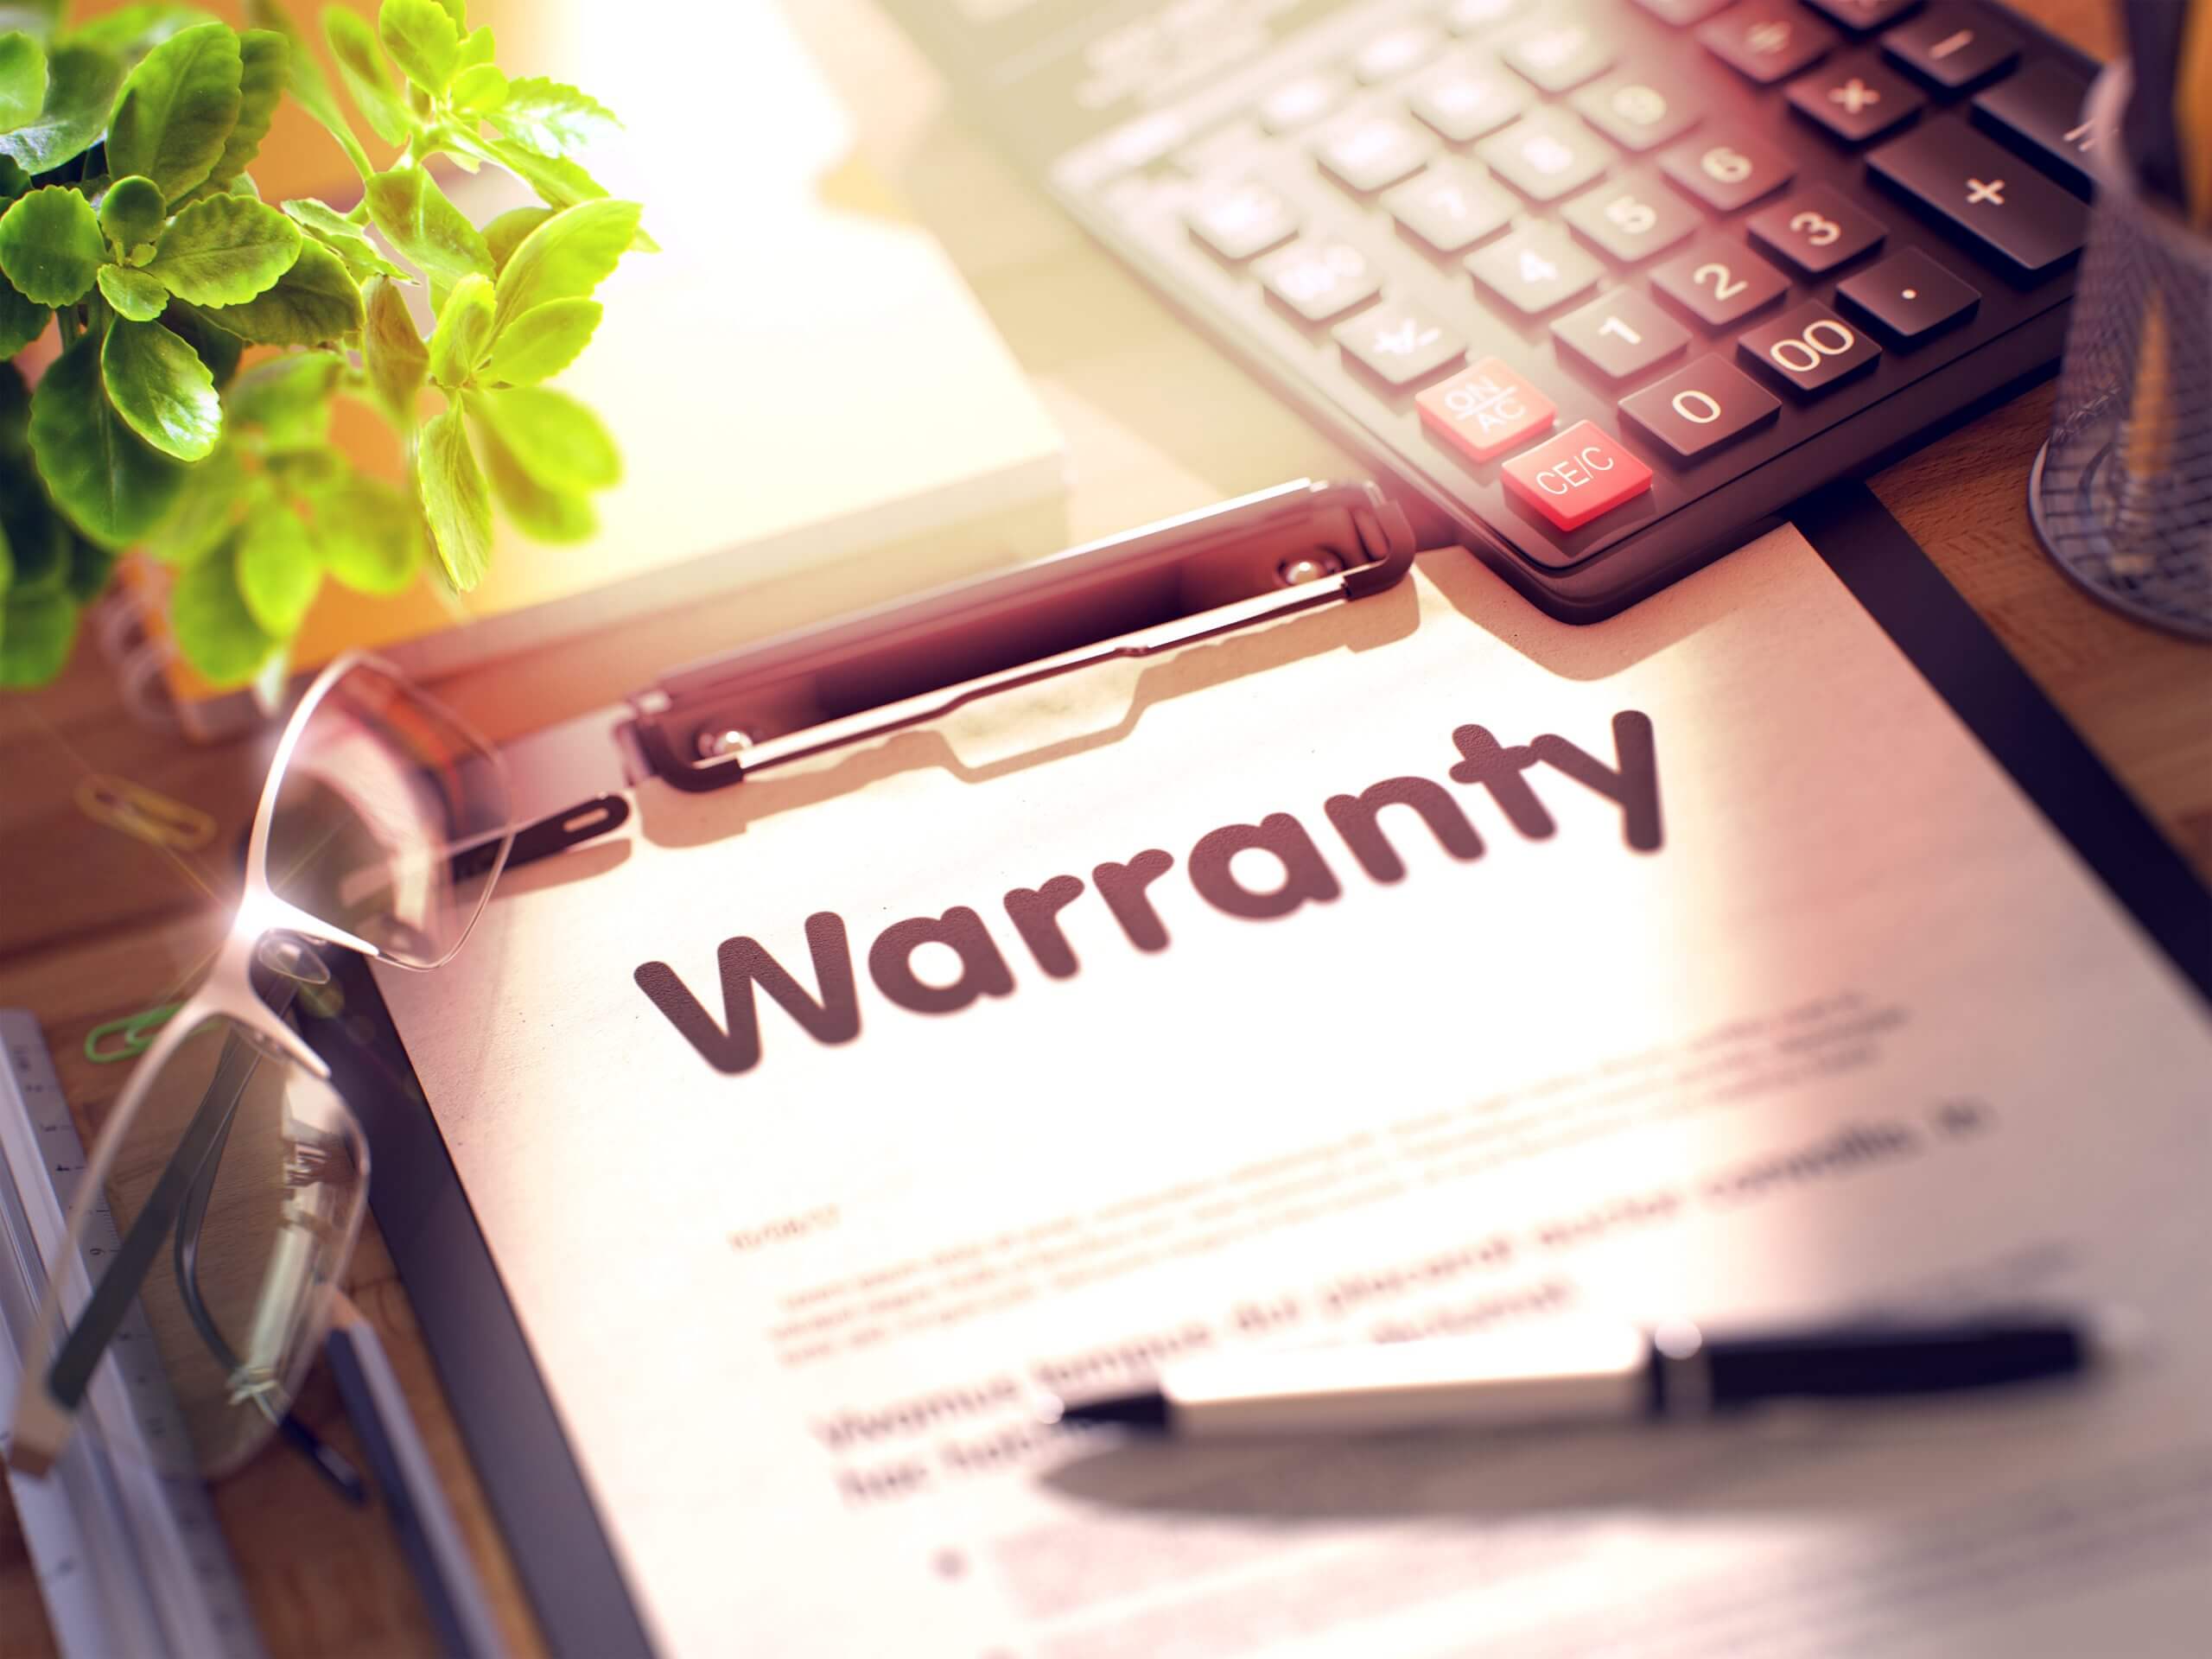 Warranty on Clipboard with Sheet of Paper on Wooden Office Table with Business and Office Supplies Around. 3d Rendering. Blurred and Toned Image.